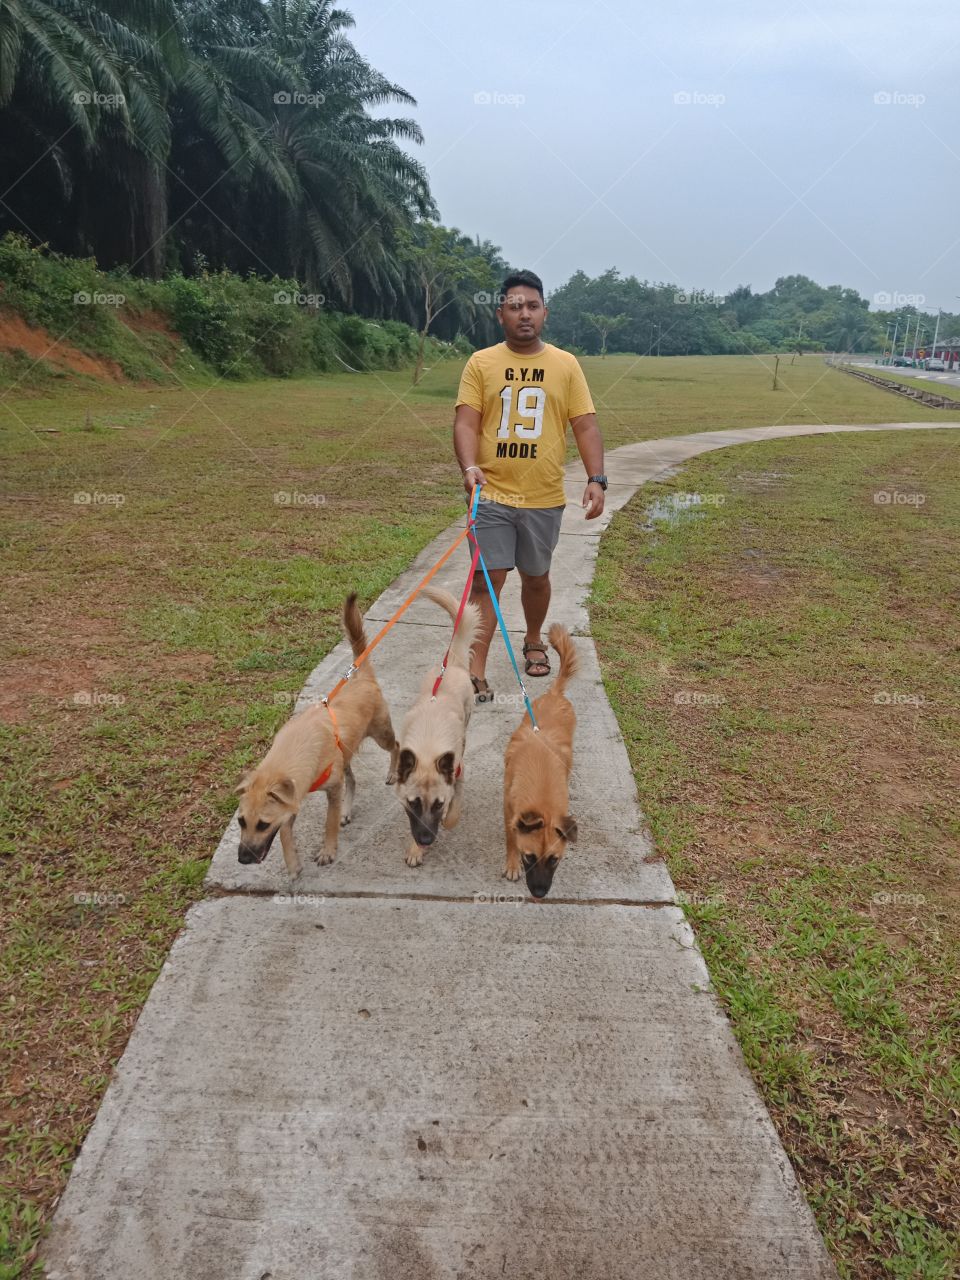 afternoon walk with the girls really helps to take out stress